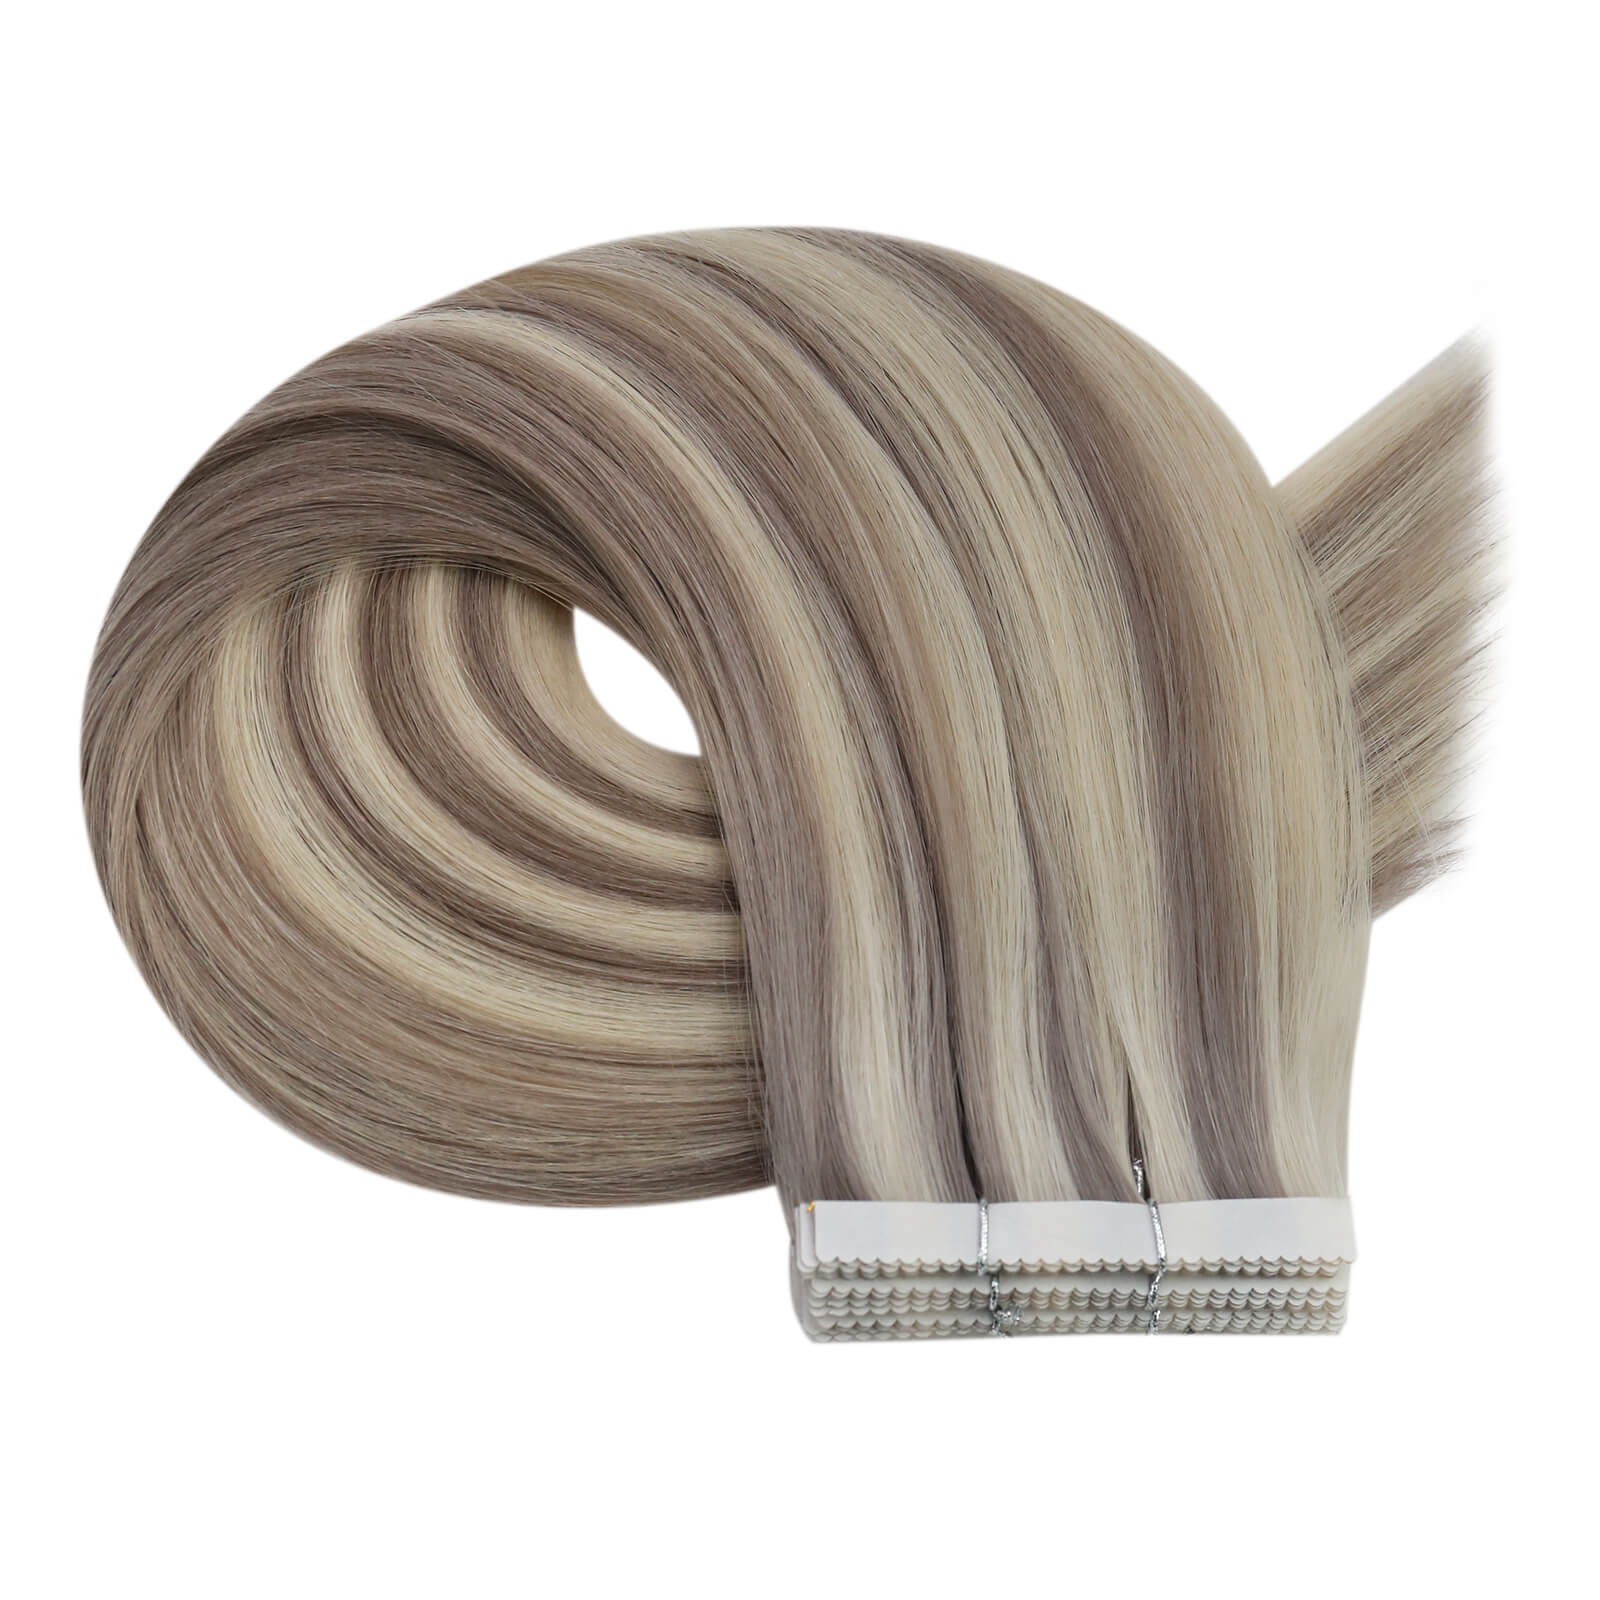 blonde tape in hair extensions real human hair